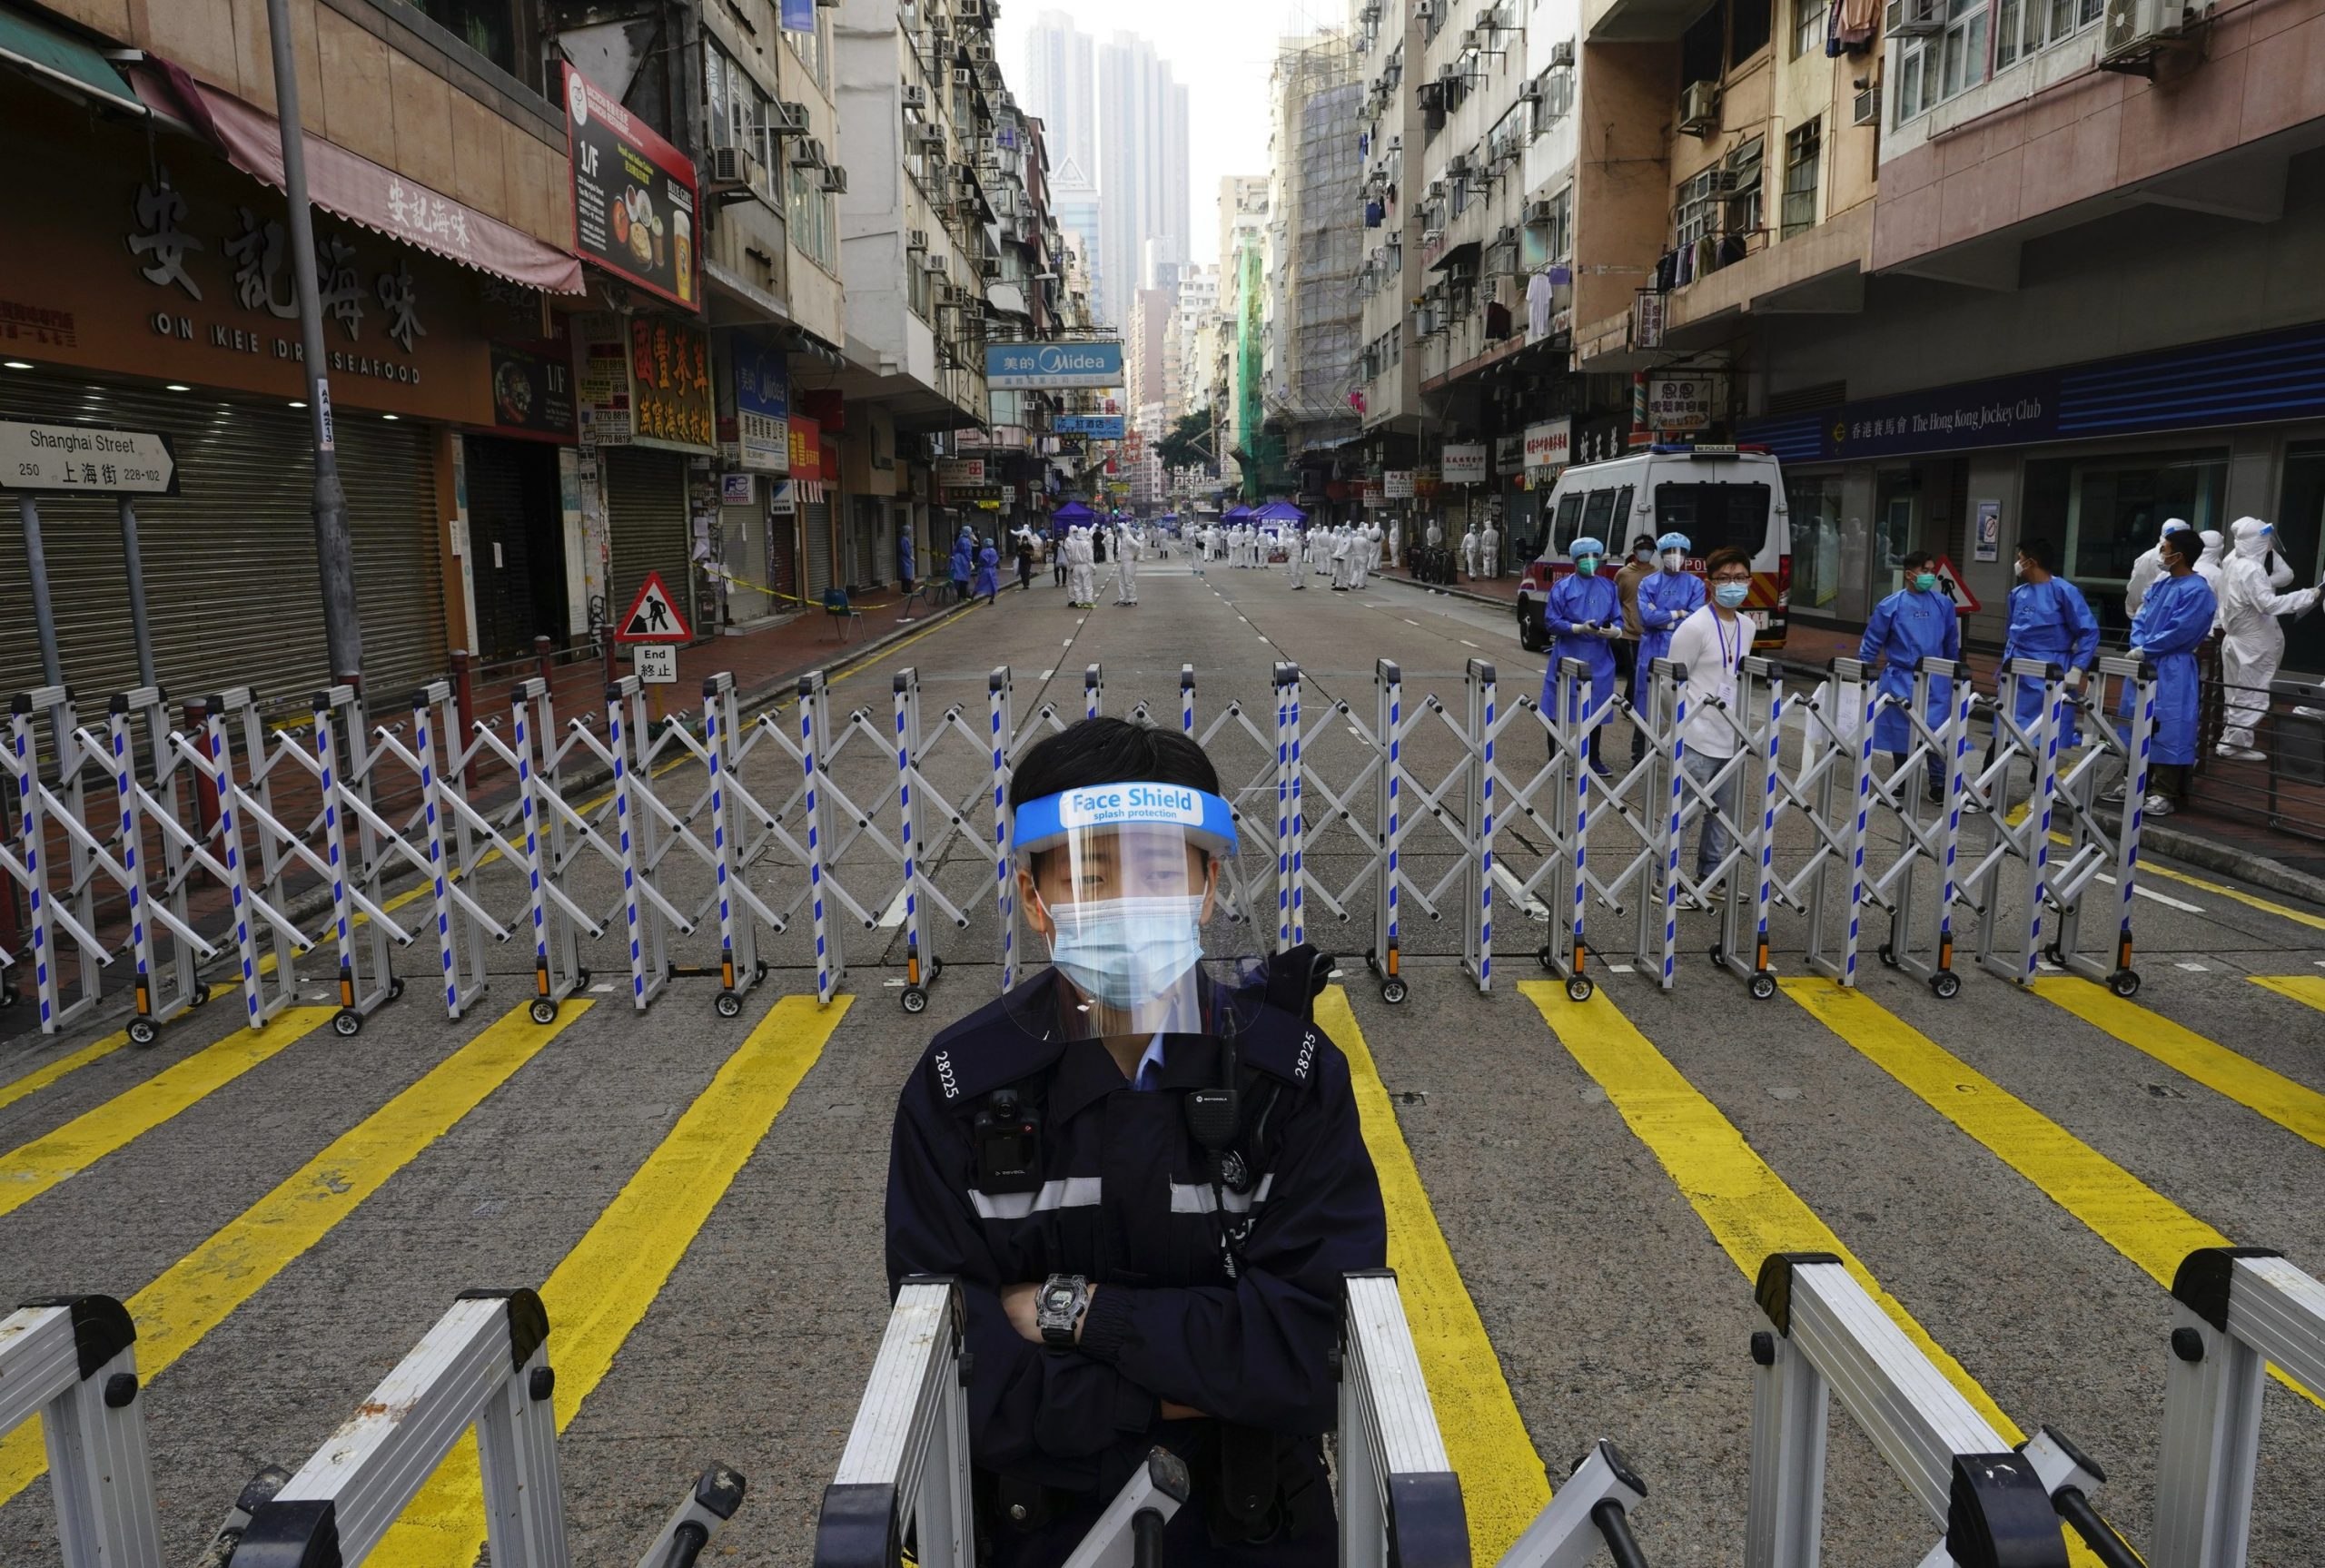 Thousands of Hong Kong residents have been locked down to contain the coronavirus